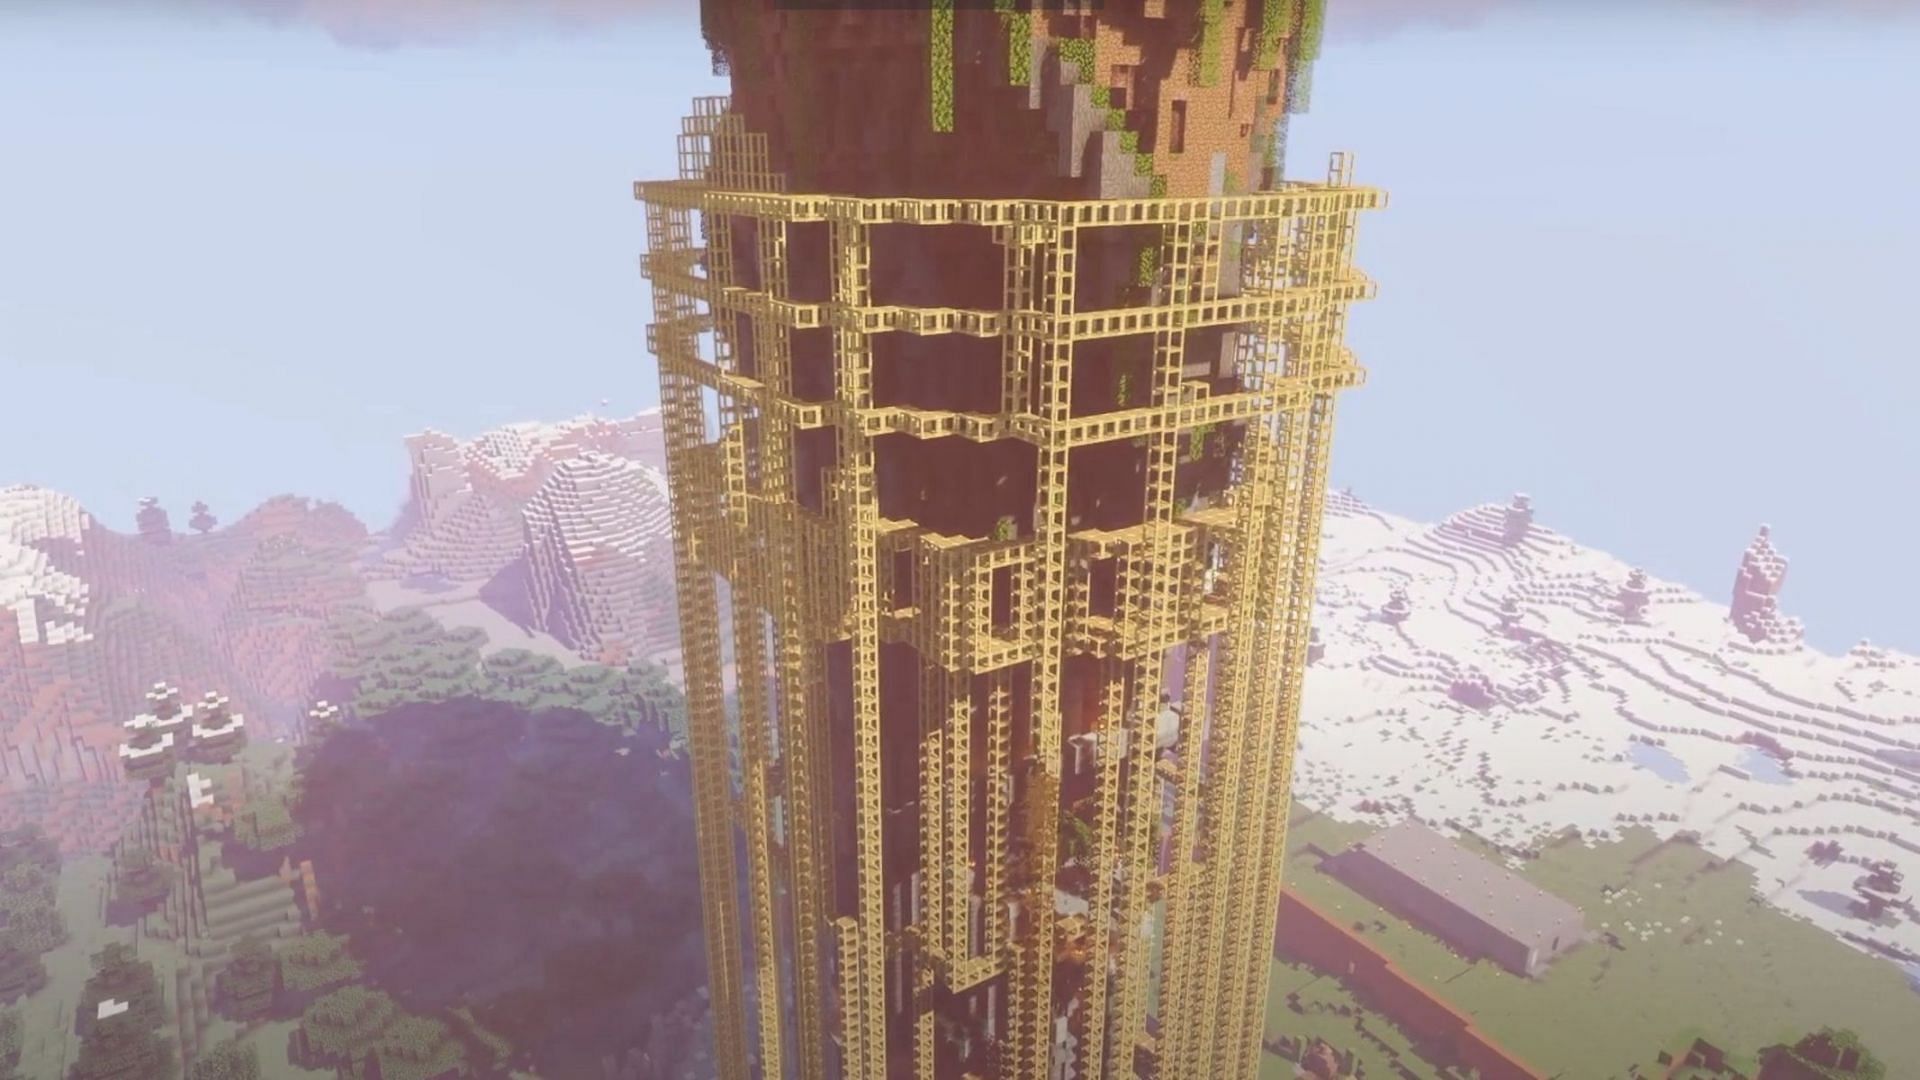 Scaffolding is primarily used for climbing tall structures (Image via Mojang)